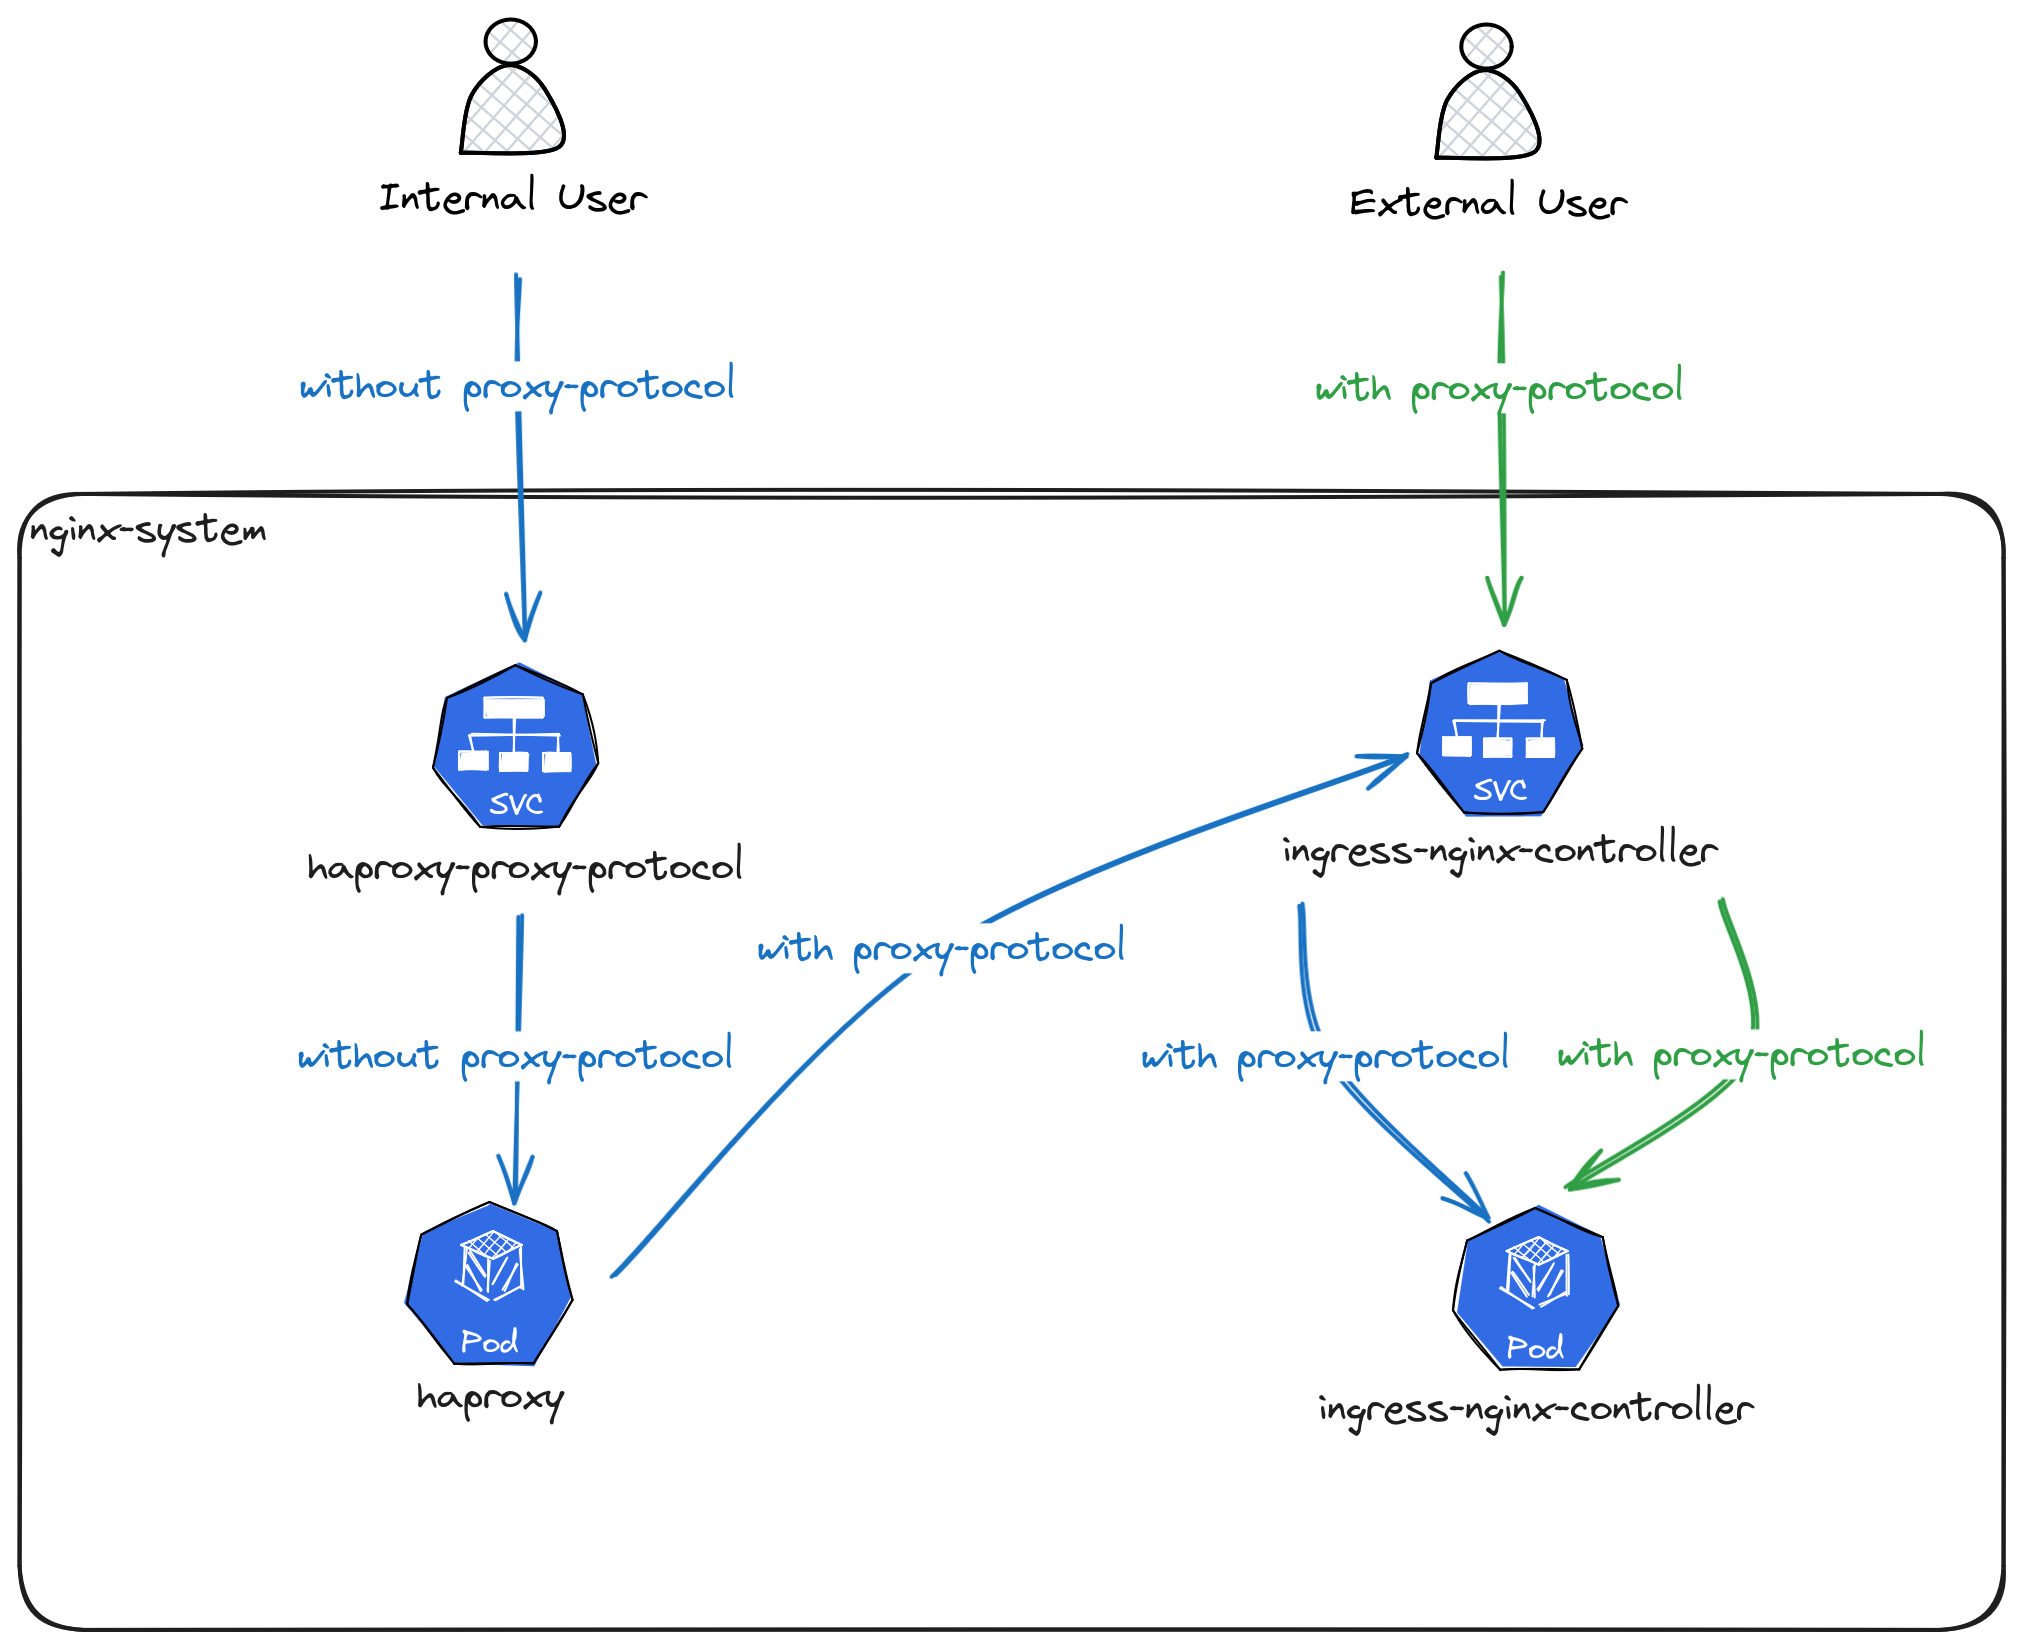 Image of the flow of traffic for internal and external users within the cluster. For internal users, the traffic without proxy-protocol hits the haproxy-proxy-protocol Service in the Kubernetes cluster, which forwards it to the haproxy Pod. That Pod then sends the traffic, now with proxy-protocol, to the ingress-nginx-controller Service, which forwards it to the ingress-nginx-controller Pod. For external users, the traffic is directly routed to the ingress-nginx-conroller Service, since it's already with proxy-protocol. It's then also forwarded to the ingress-nginx-controller Pod.